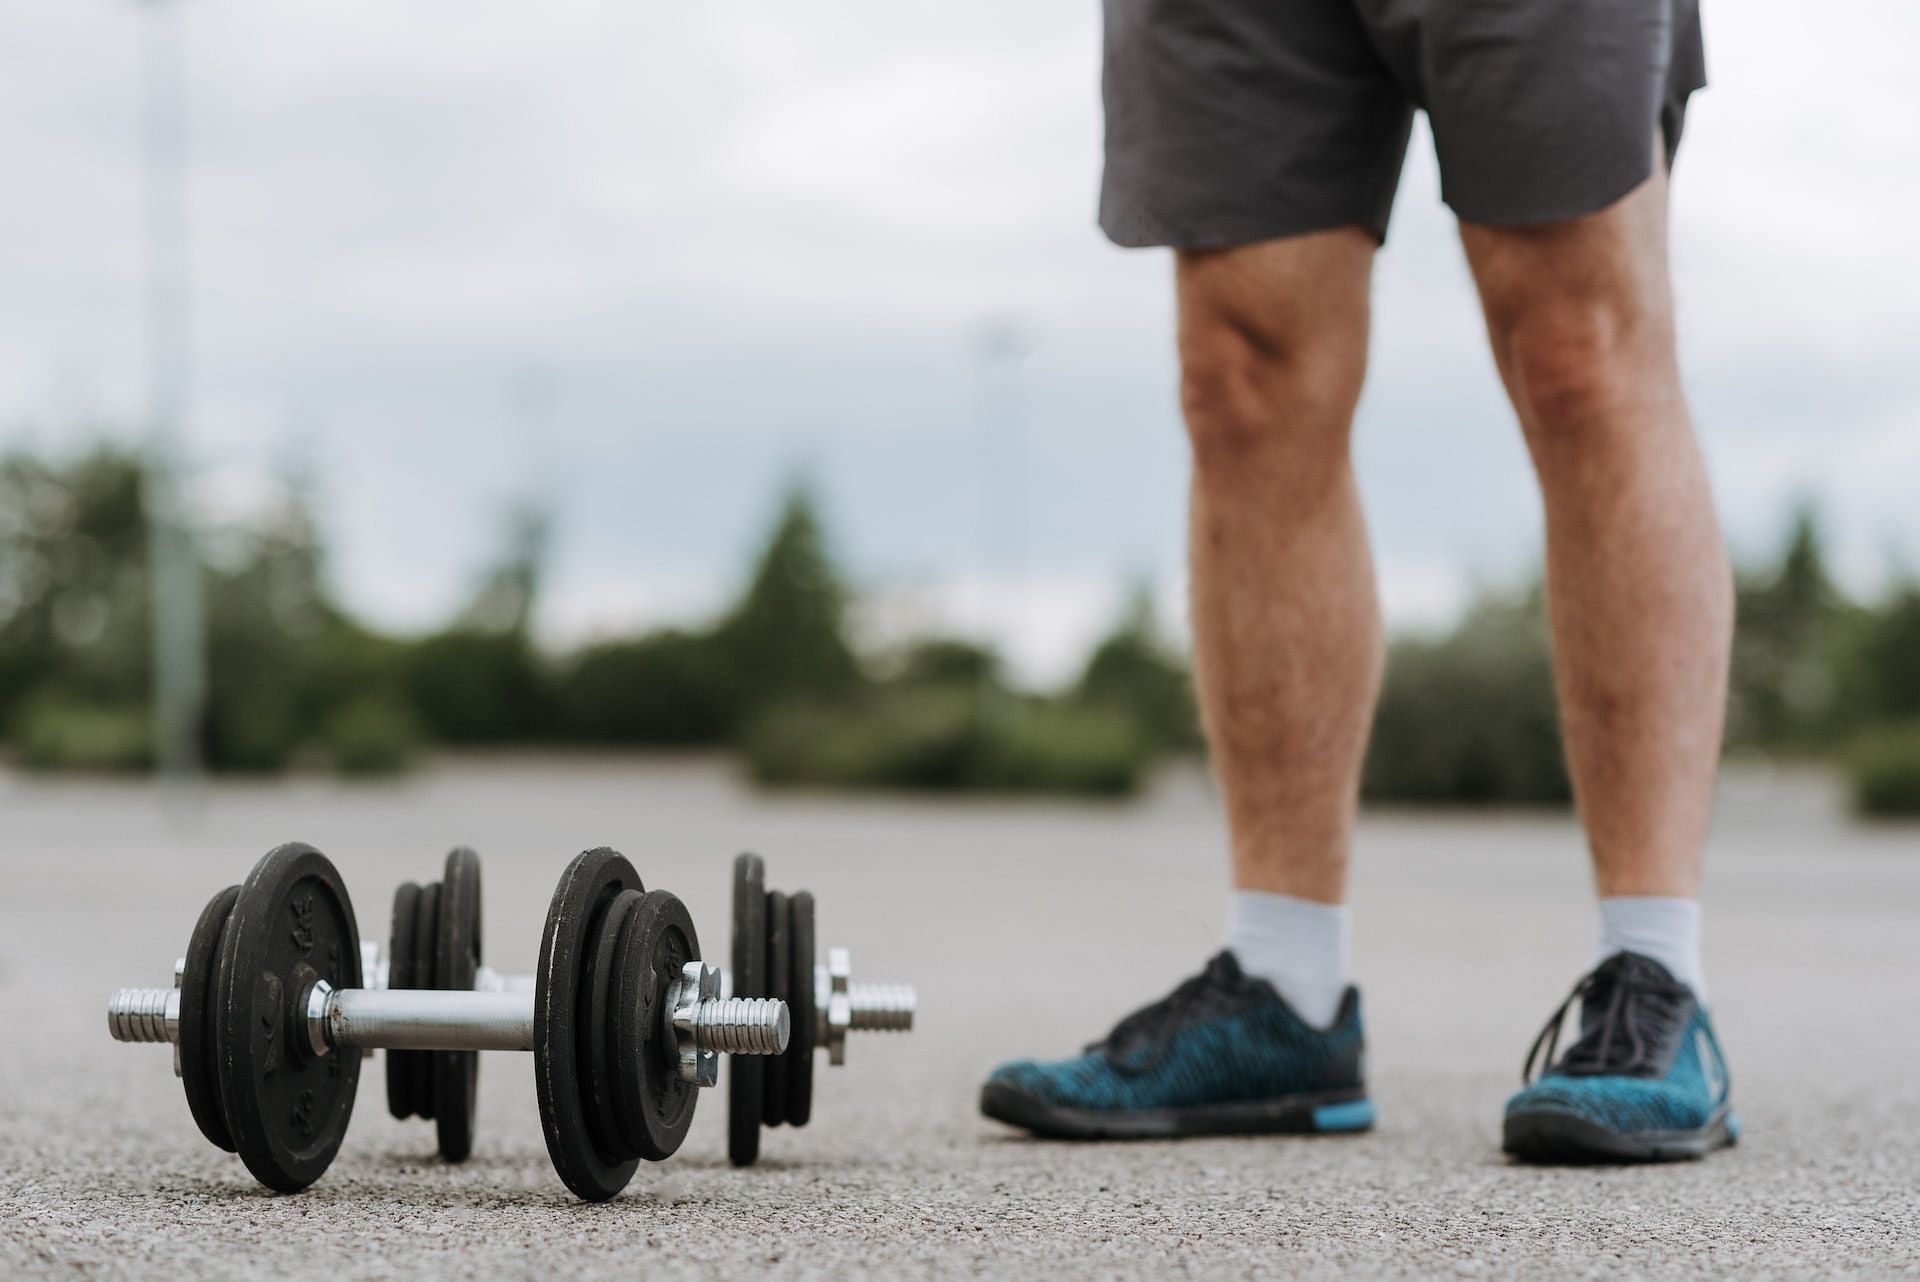 Leg exercises with dumbbells target the entire lower body. (Photo via Pexels/Anete Lusina)